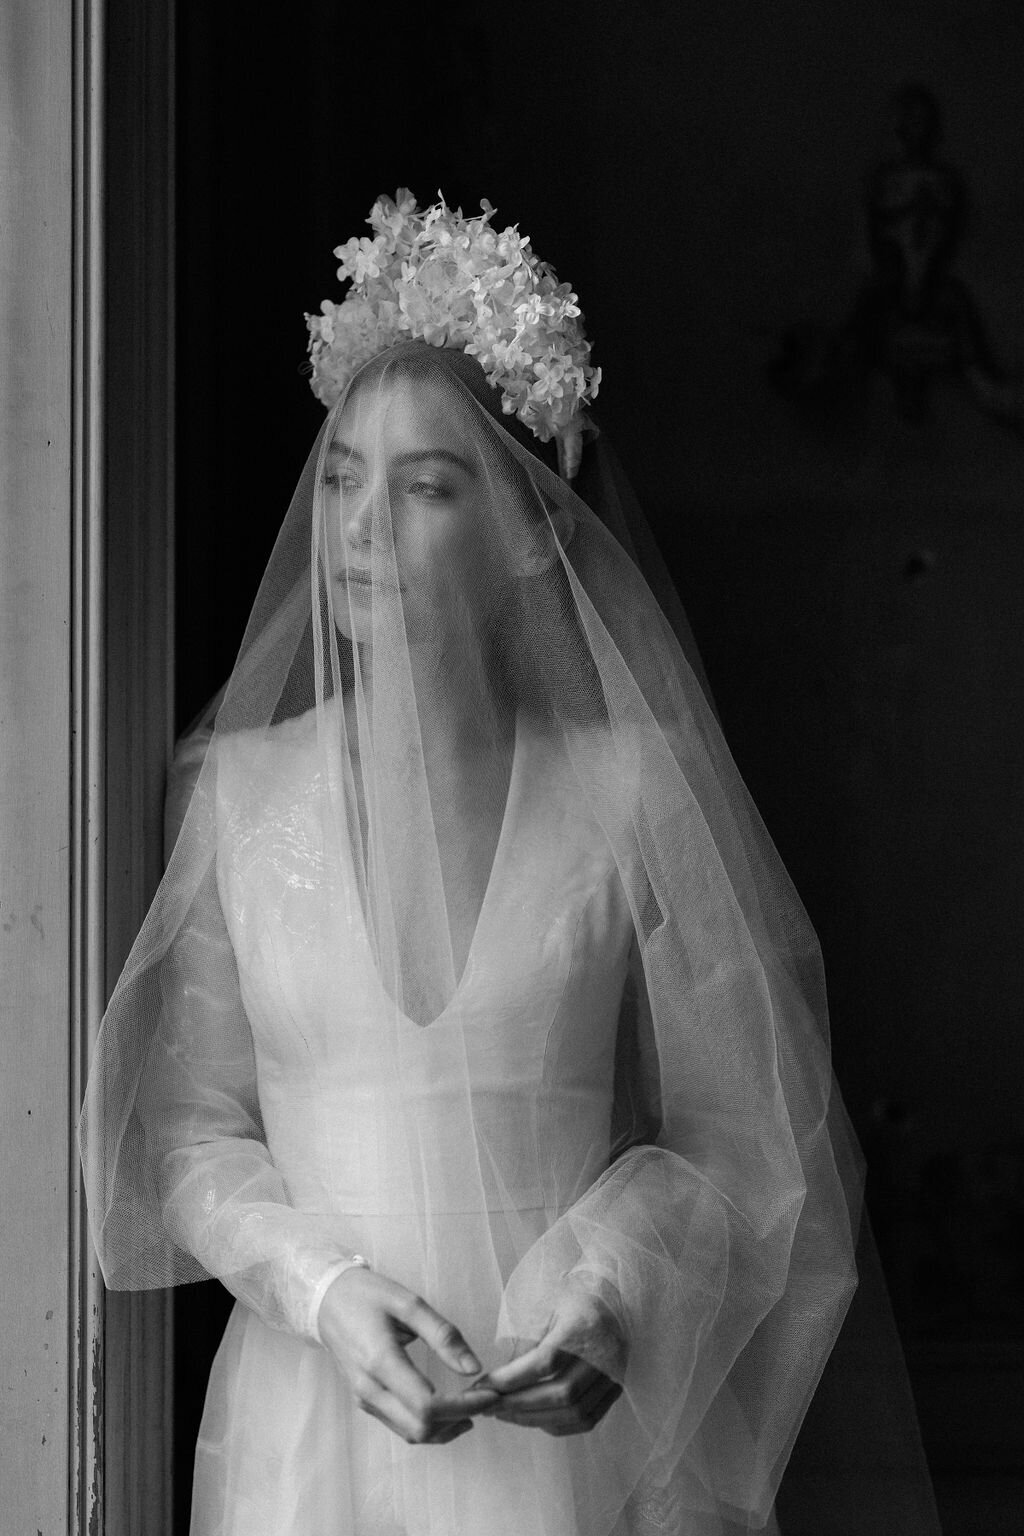 bride wearing veil over face looking out the window